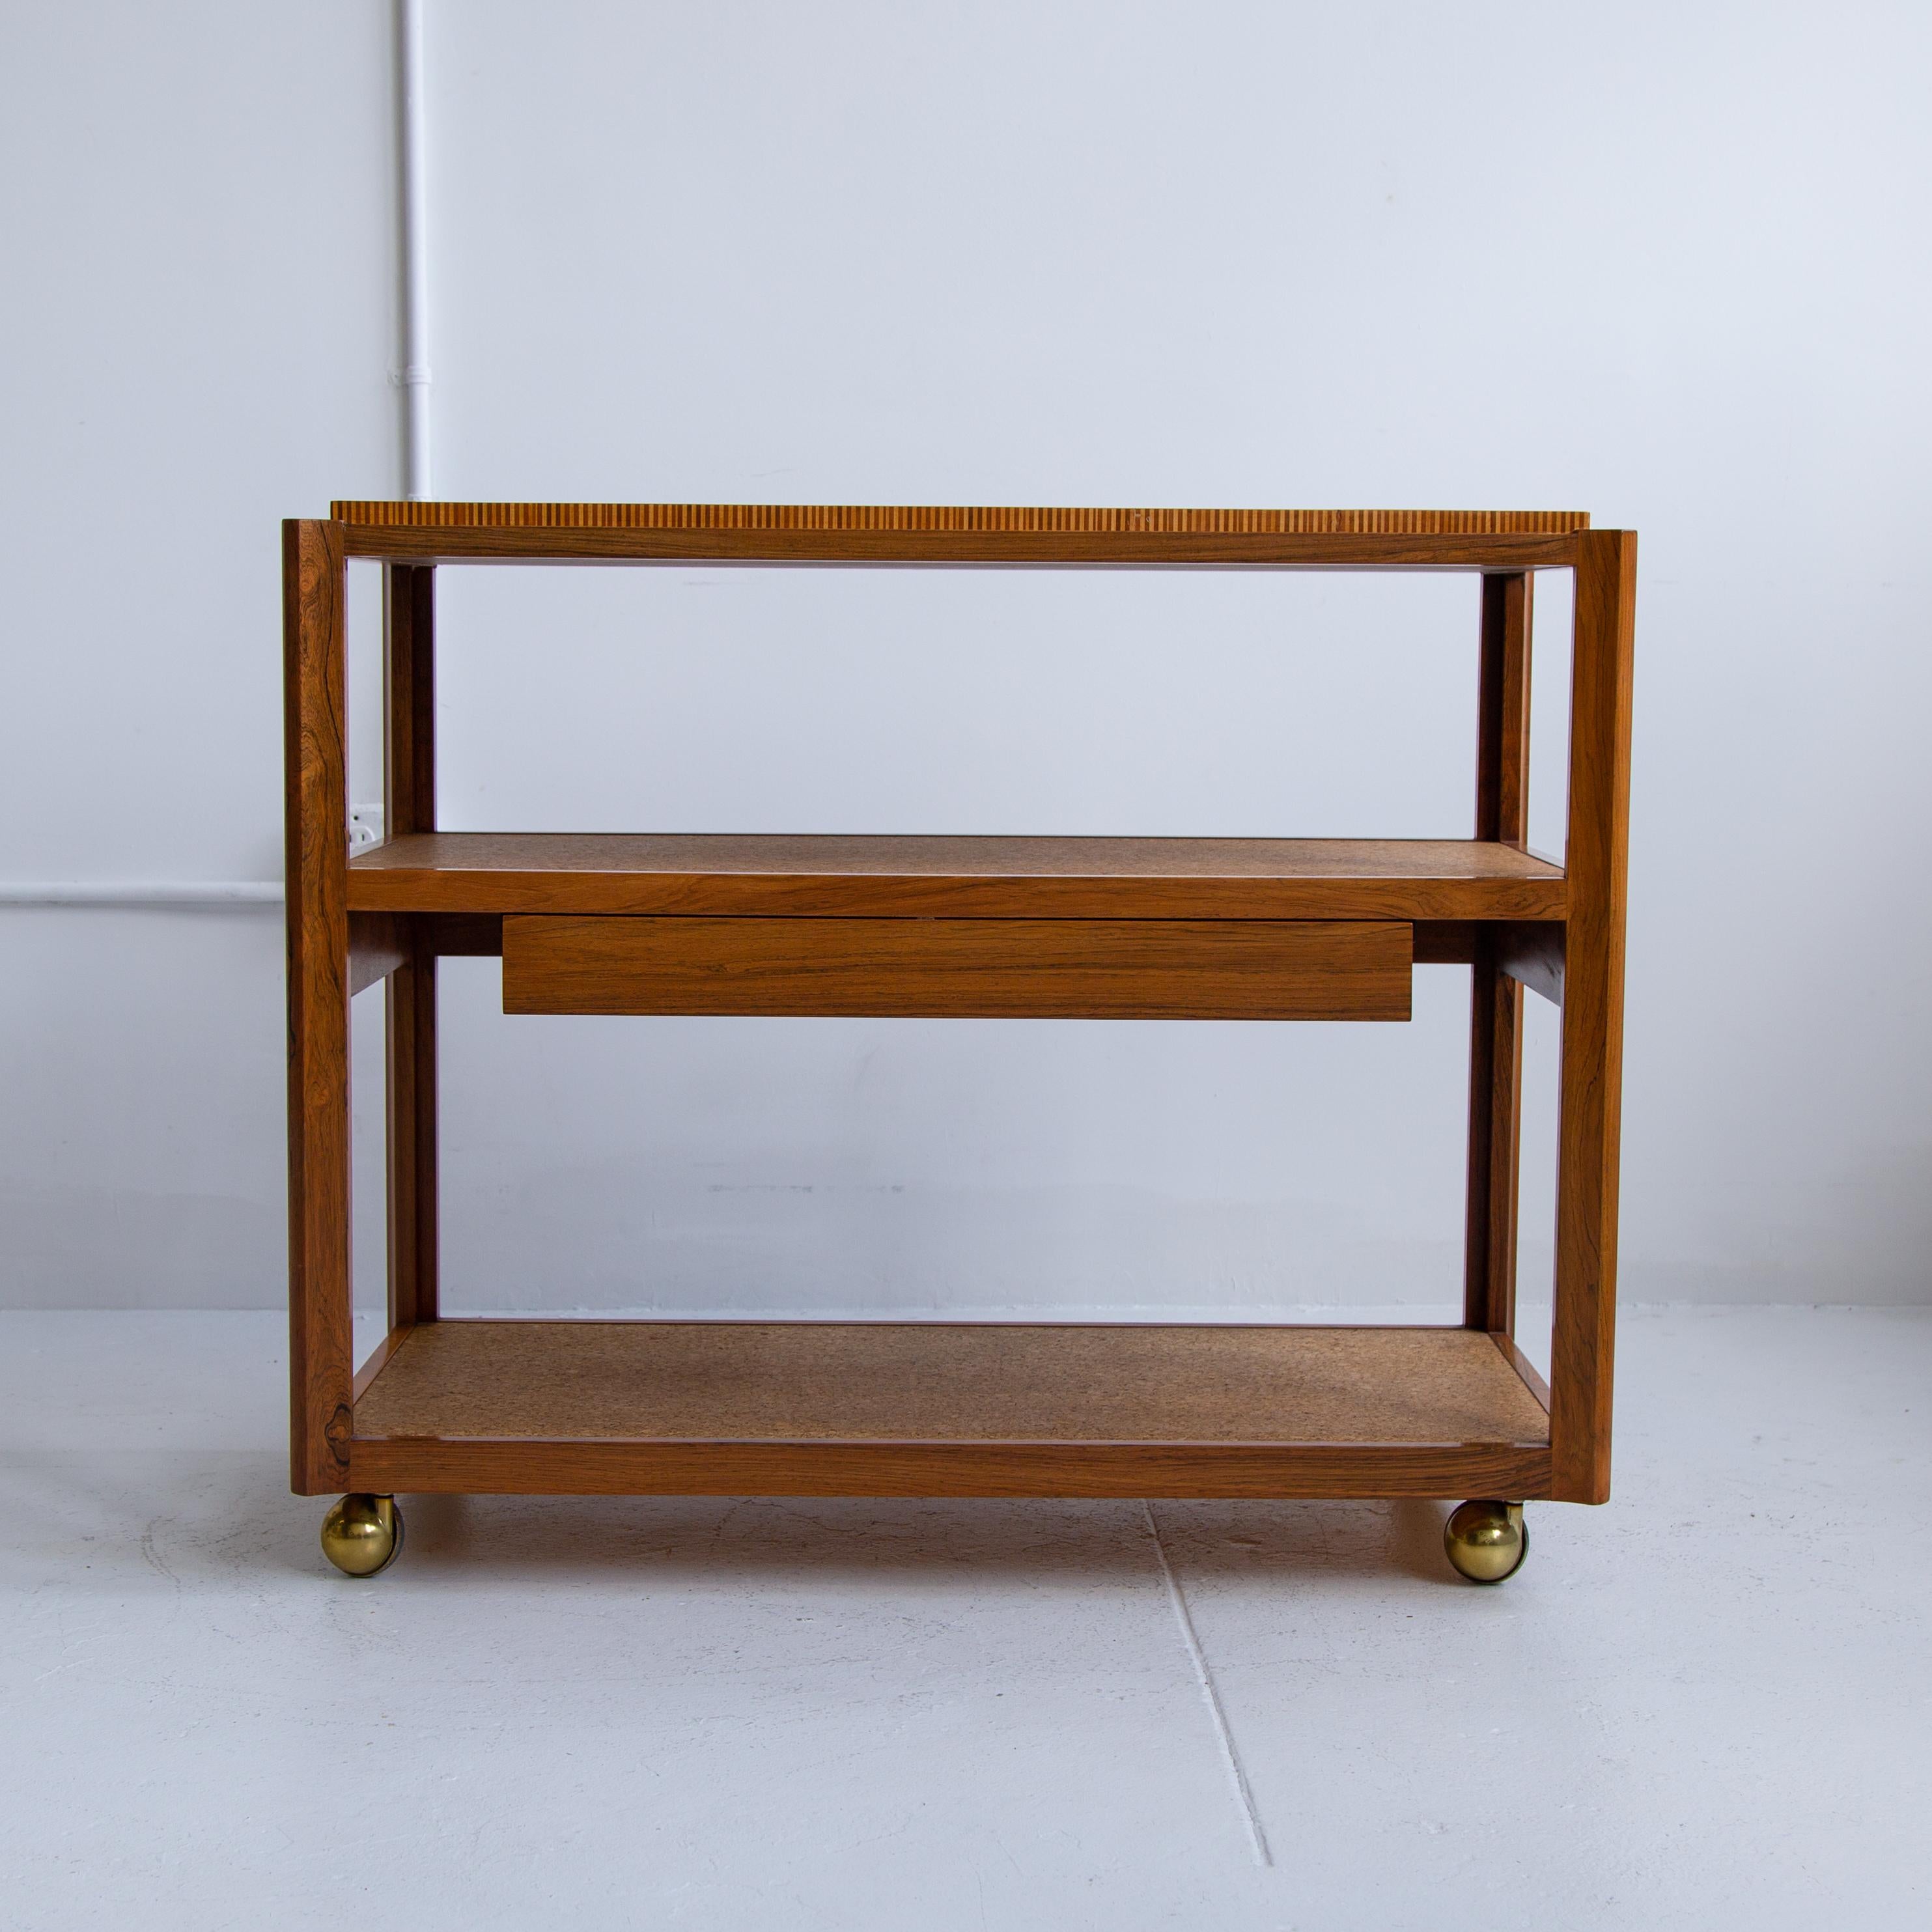 Iconic Edward Wormley for Dunbar serving bar cart or bar trolley with drawer on brass casters. The cart is exquisitely made with a mix extraordinary materials; sculpted Brazilian rosewood frame, shelves are cork covered, and top is laminated